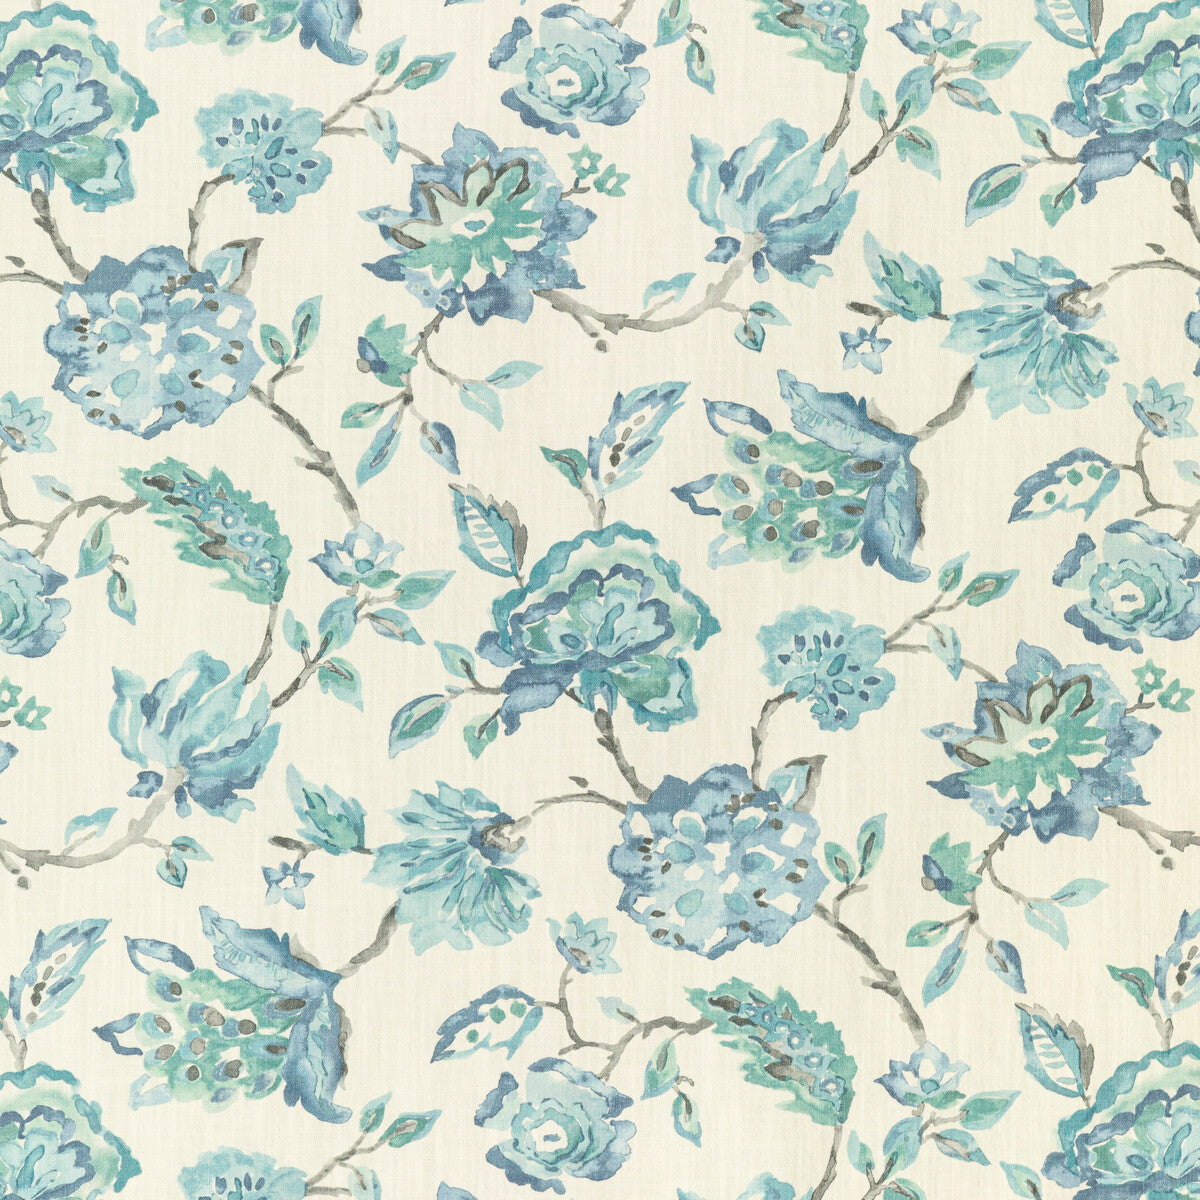 Etheria fabric in delphinium color - pattern ETHERIA.15.0 - by Kravet Basics in the Monterey collection